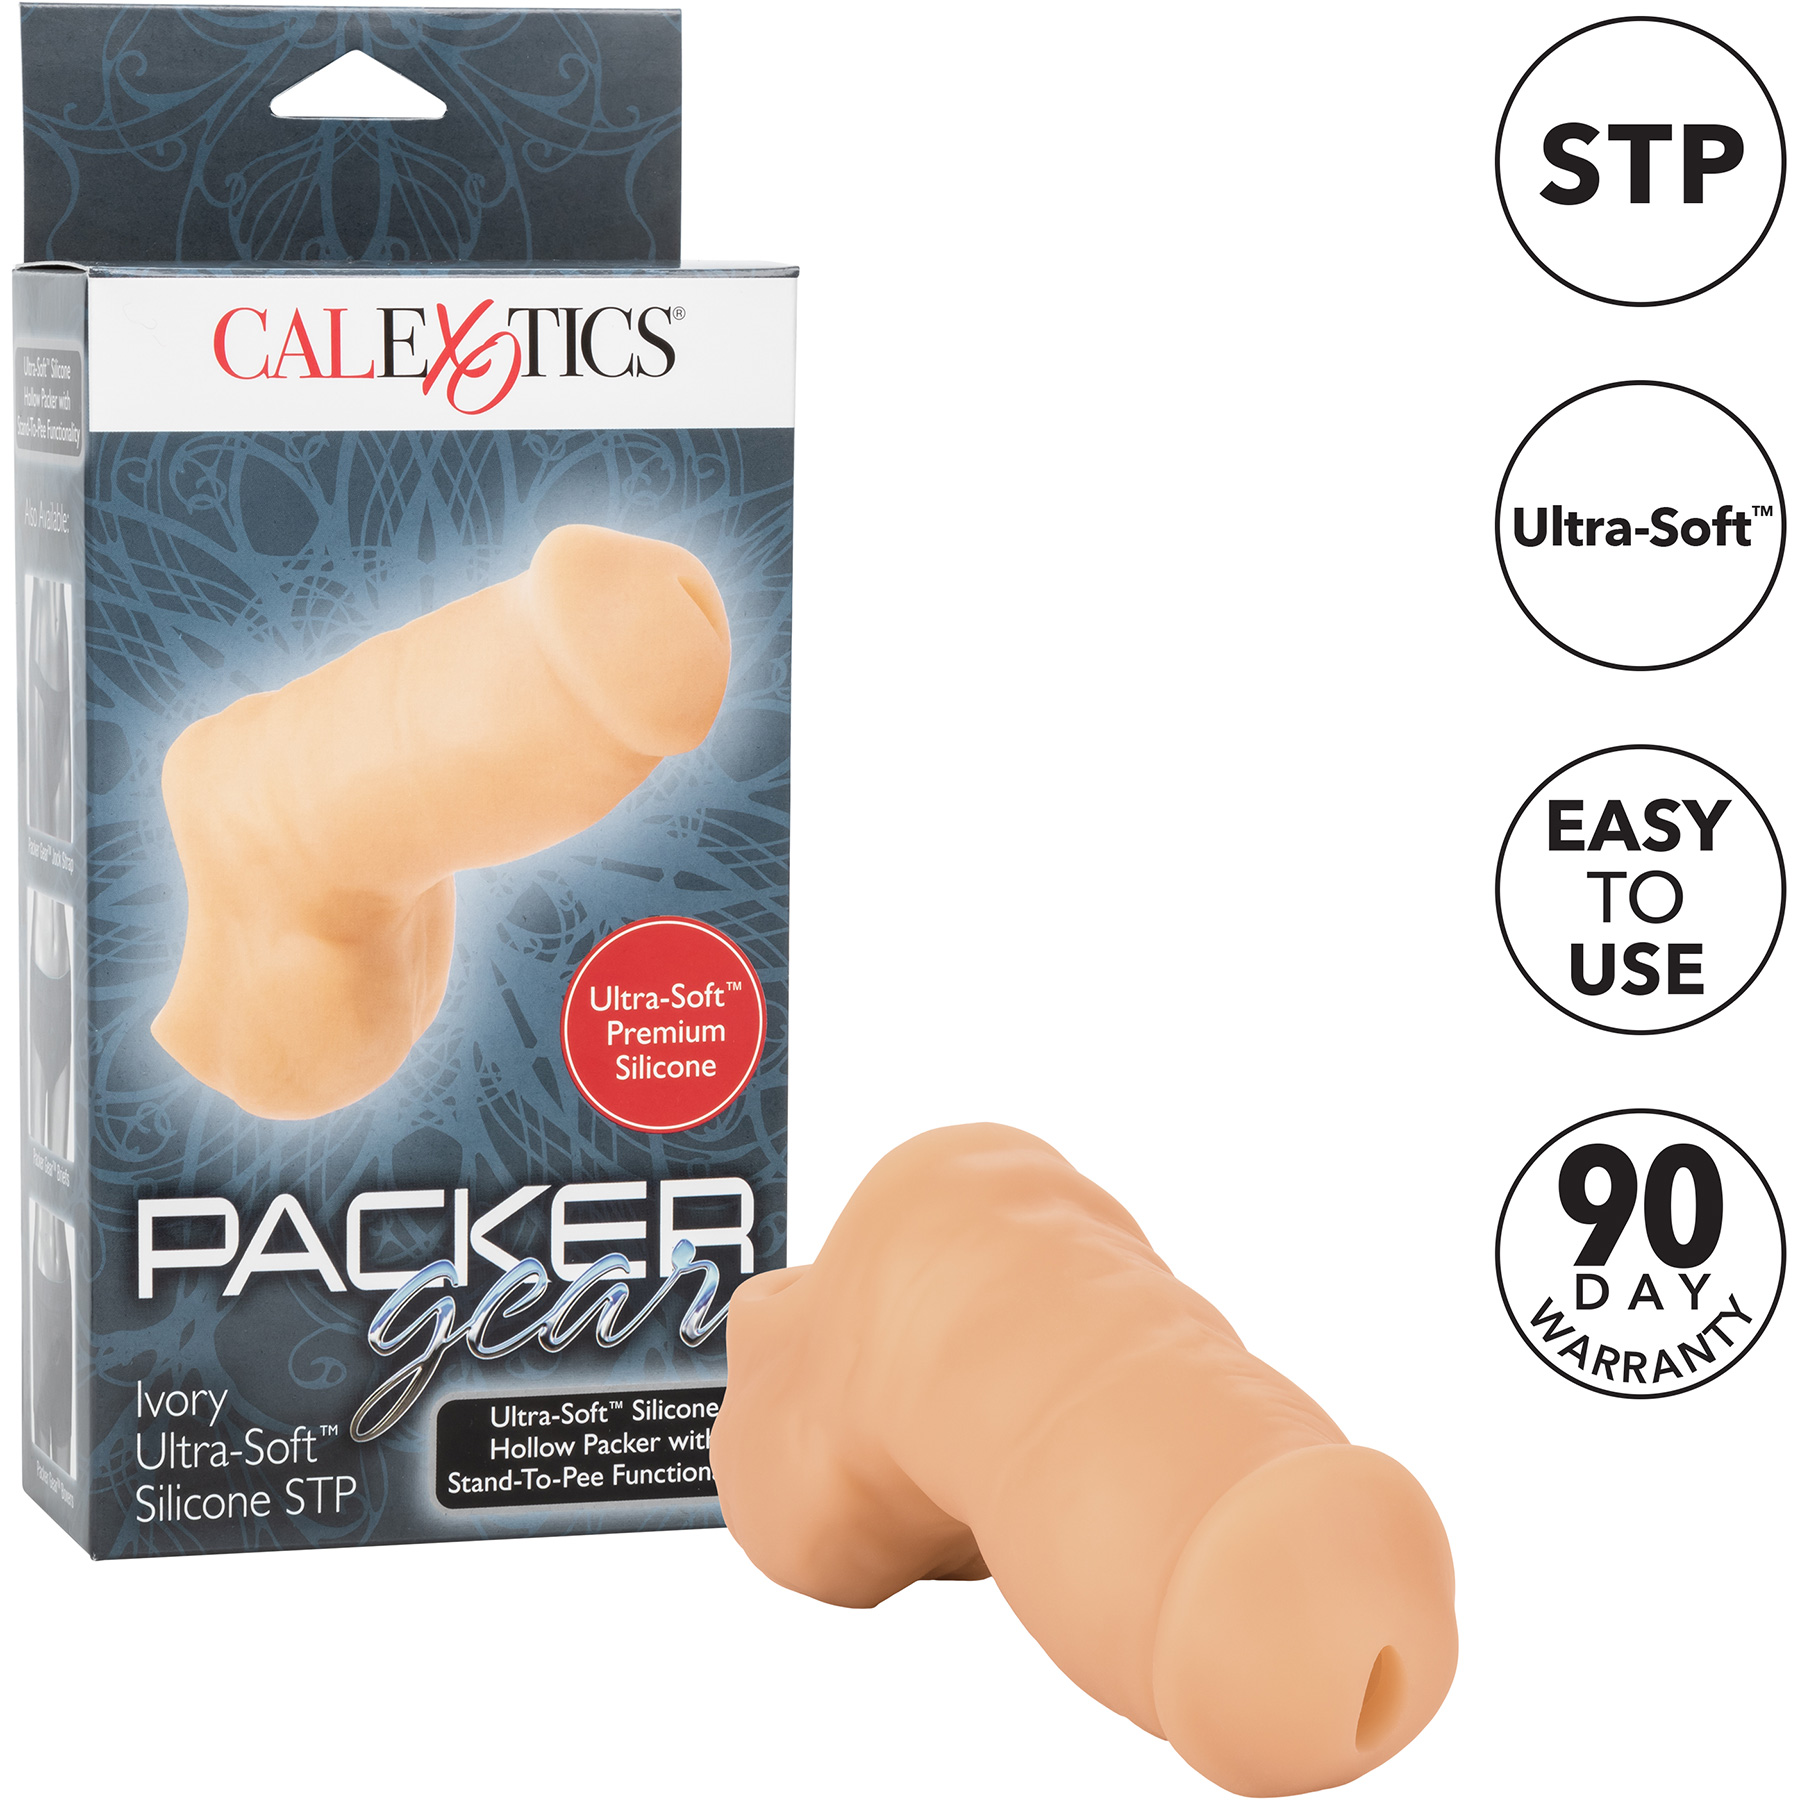 Packer Gear Ultra-Soft Silicone STP Packer - Features